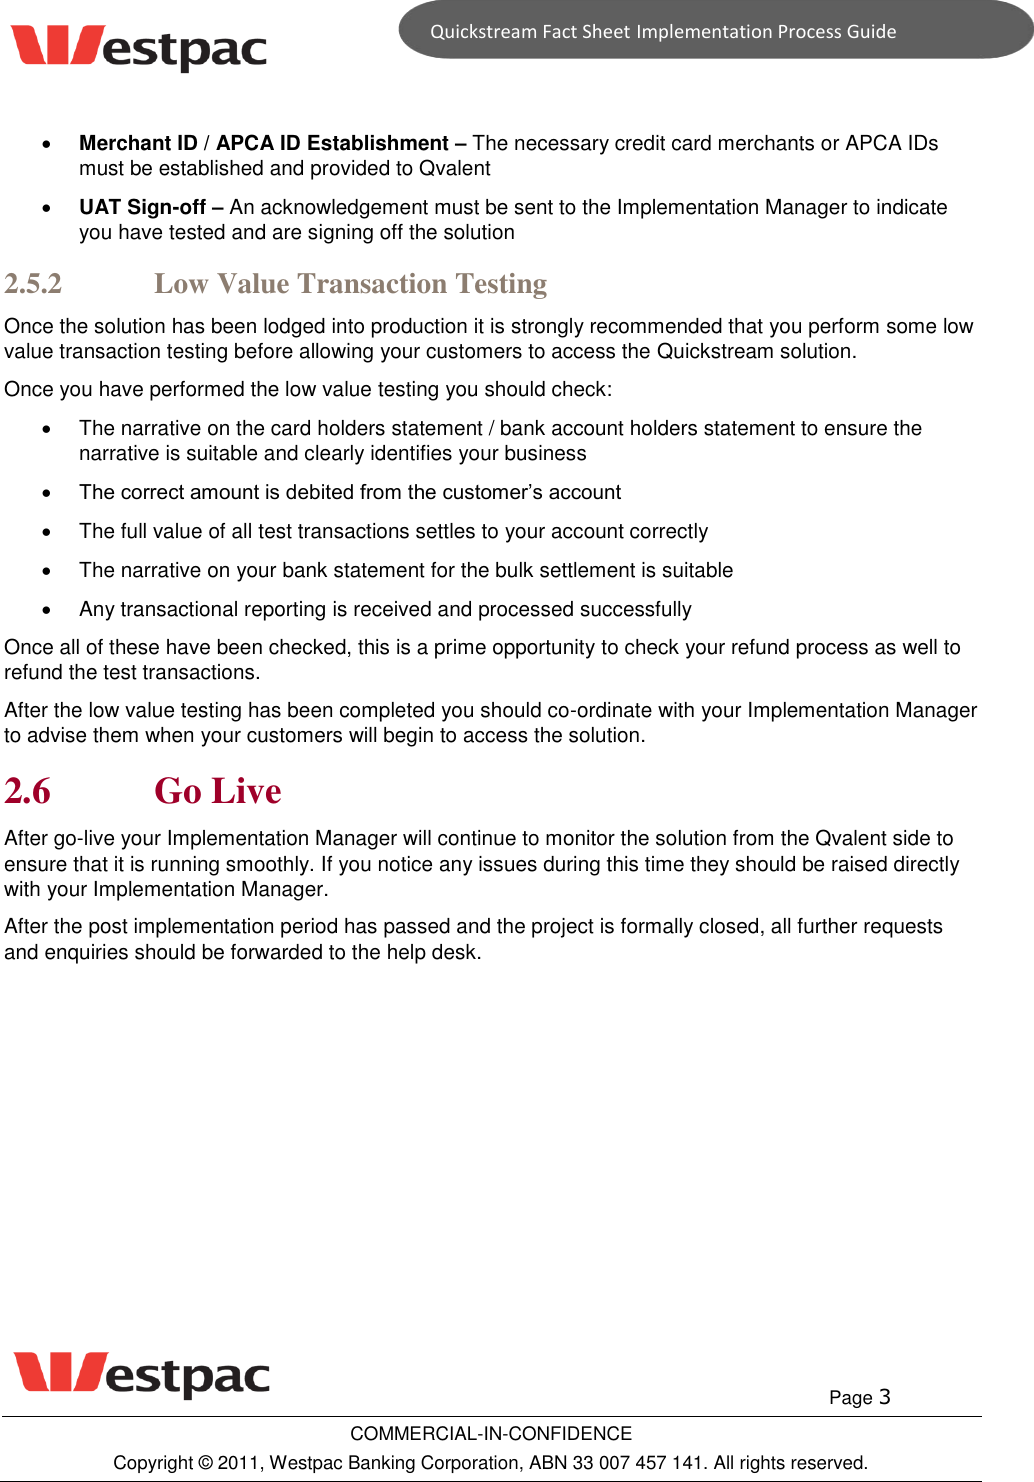 Page 3 of 3 - Quickstream Fact Sheet - Implementation Process Guide